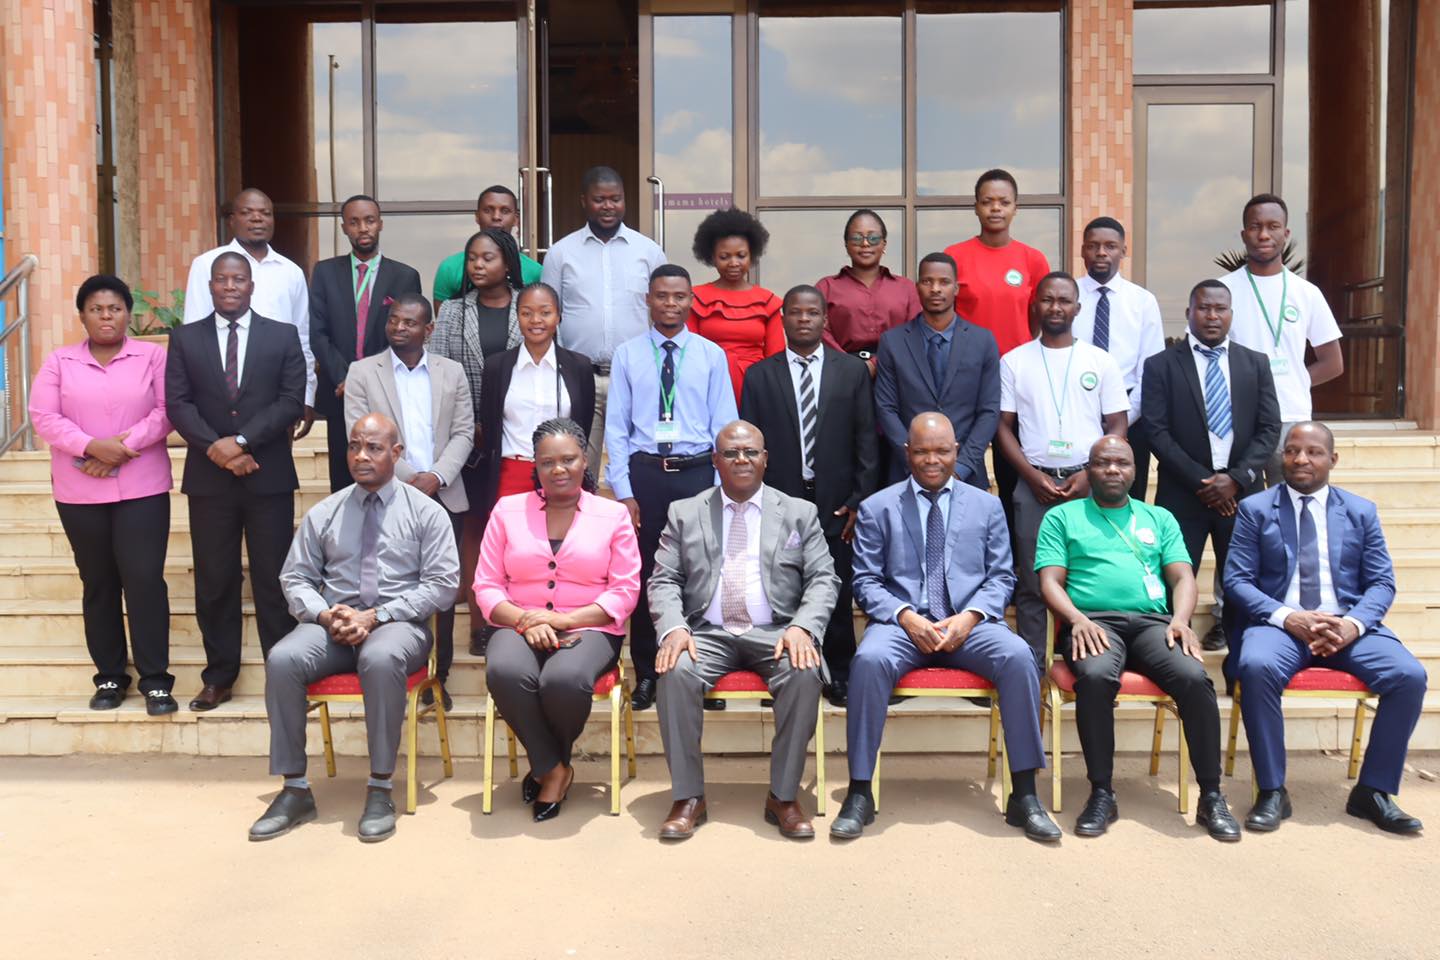 NEEF HOLDS LOAN RECOVERIES REVIEW MEETING FOR CENTRAL WEST REGION